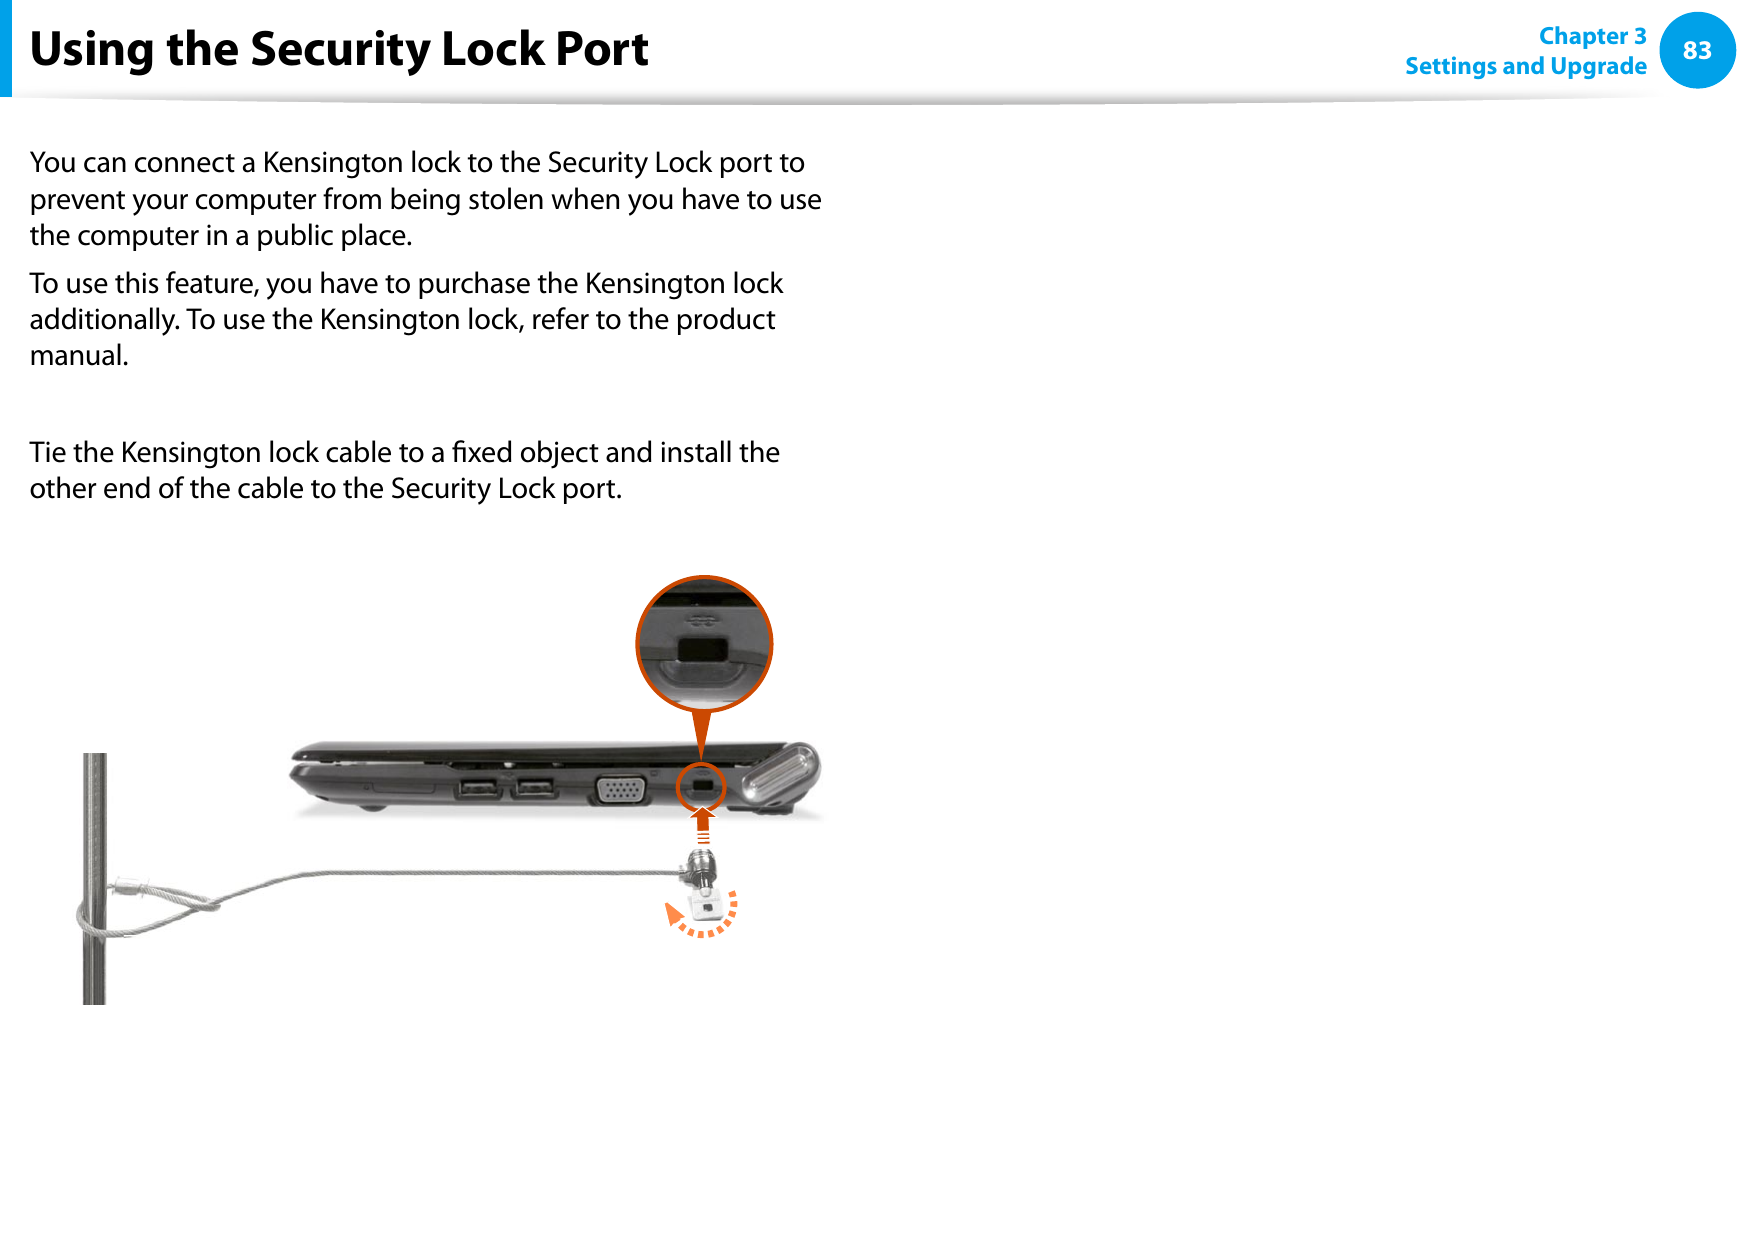 8283Chapter 3 Settings and UpgradeUsing the Security Lock PortYou can connect a Kensington lock to the Security Lock port to prevent your computer from being stolen when you have to use the computer in a public place.To use this feature, you have to purchase the Kensington lock additionally. To use the Kensington lock, refer to the product manual.Tie the Kensington lock cable to a xed object and install the other end of the cable to the Security Lock port.